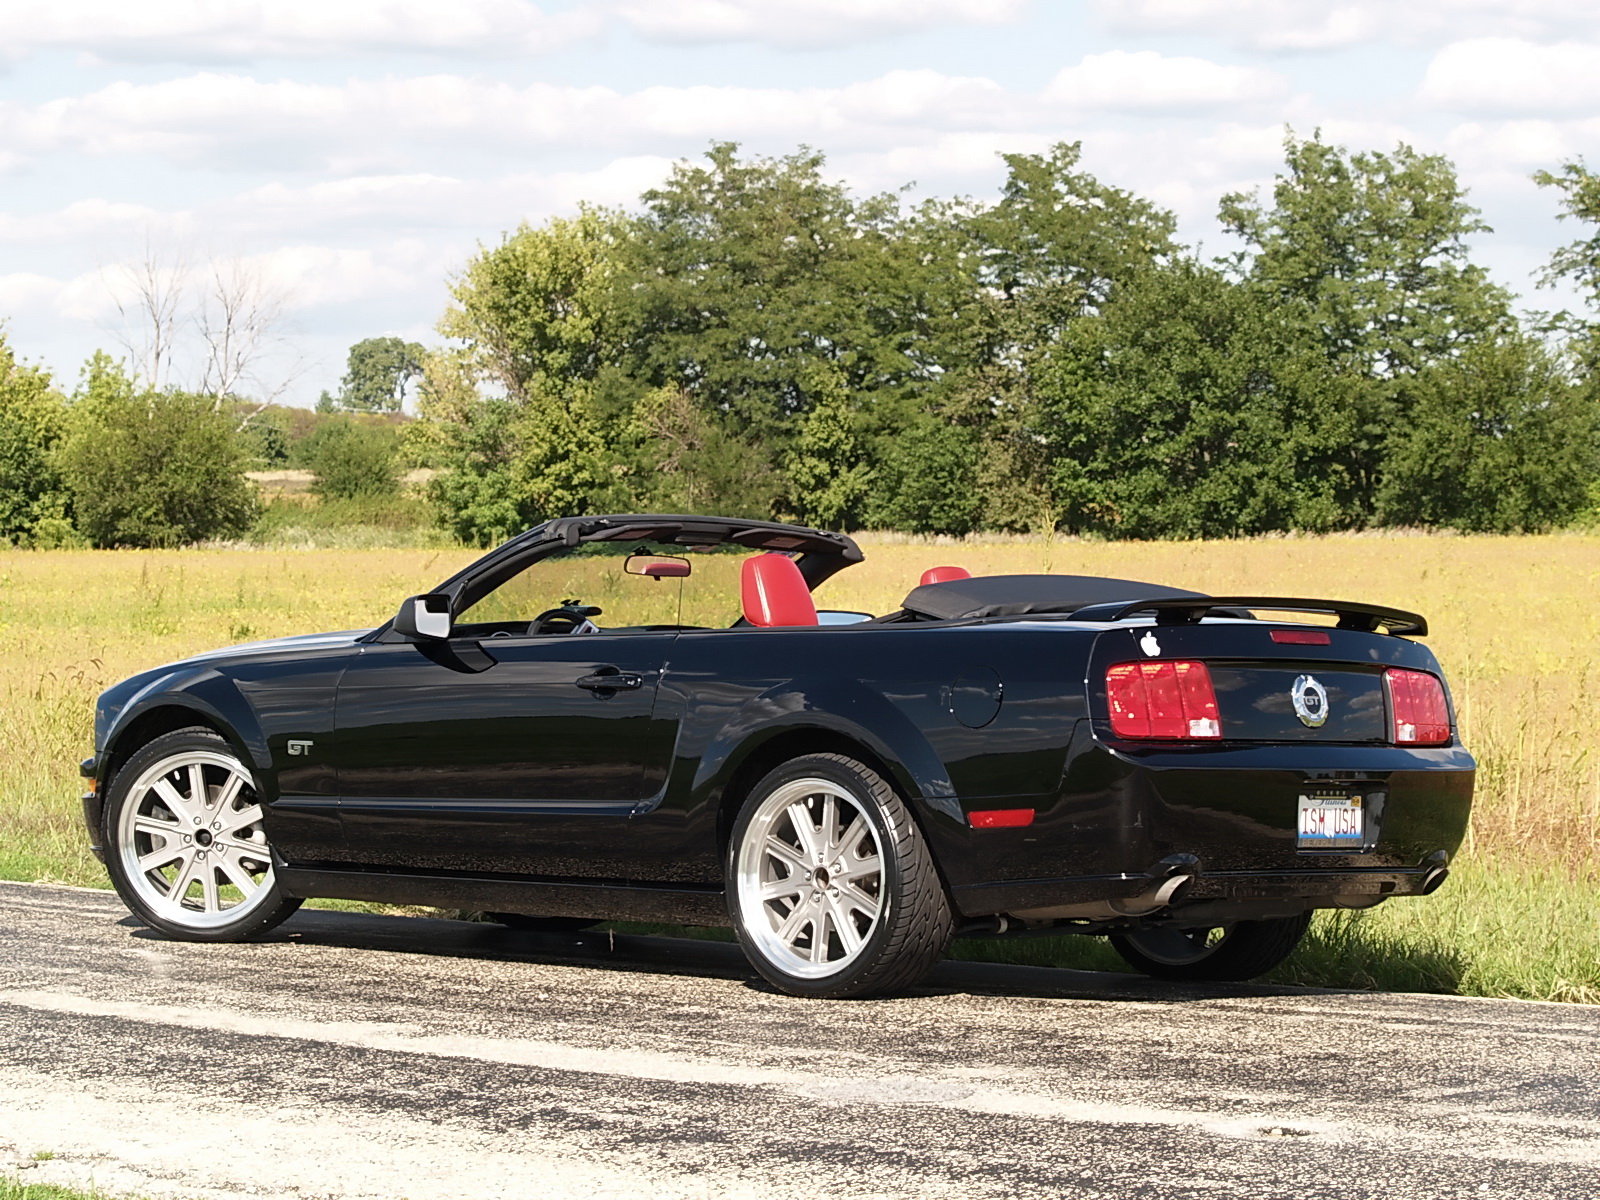 Pictures of 2005 ford mustang convertible #2